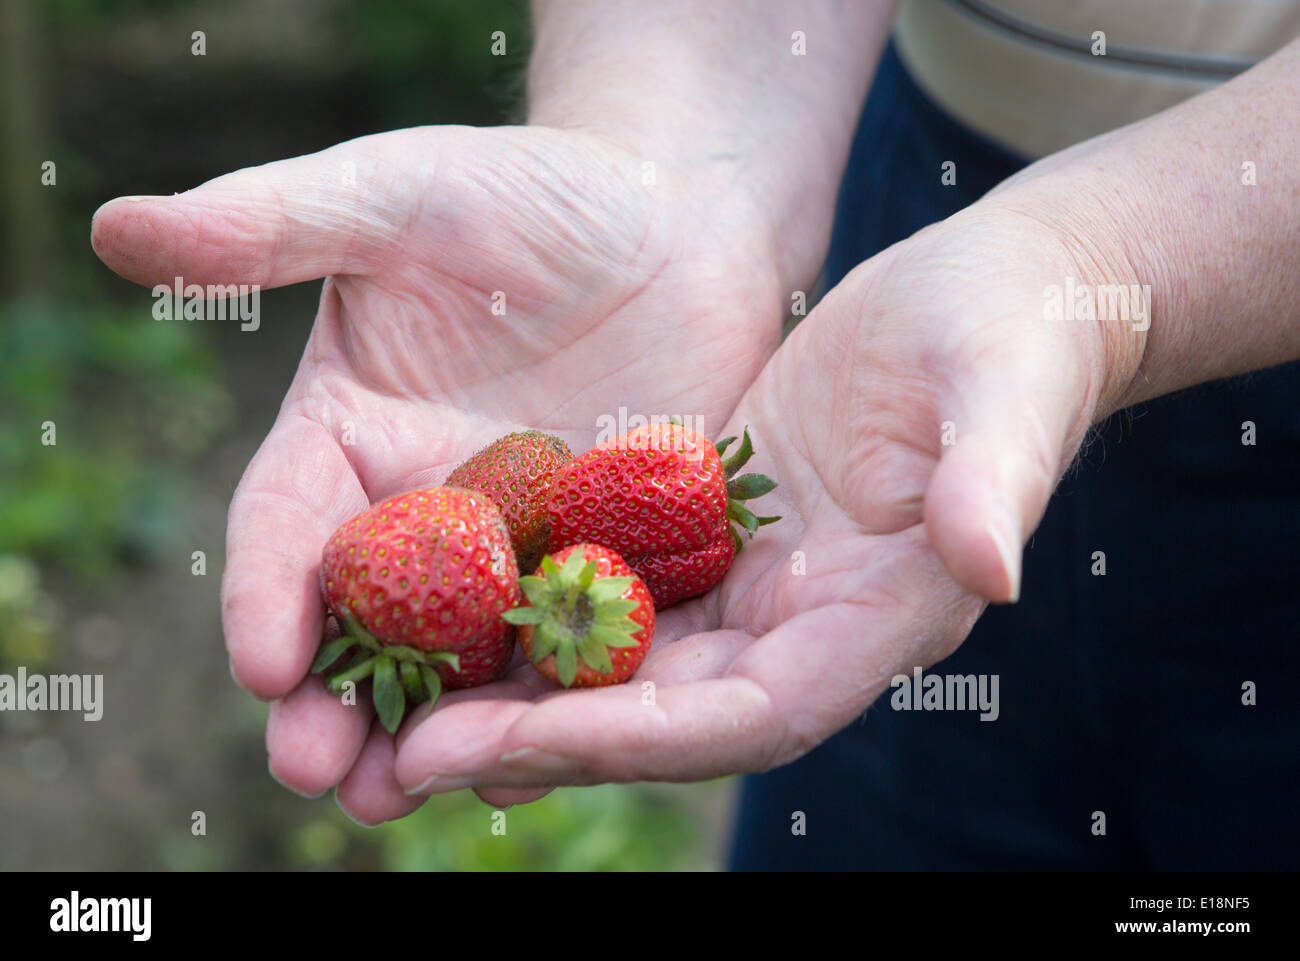 Hand with fresh ripe strawberries from the allotment garden Stock Photo